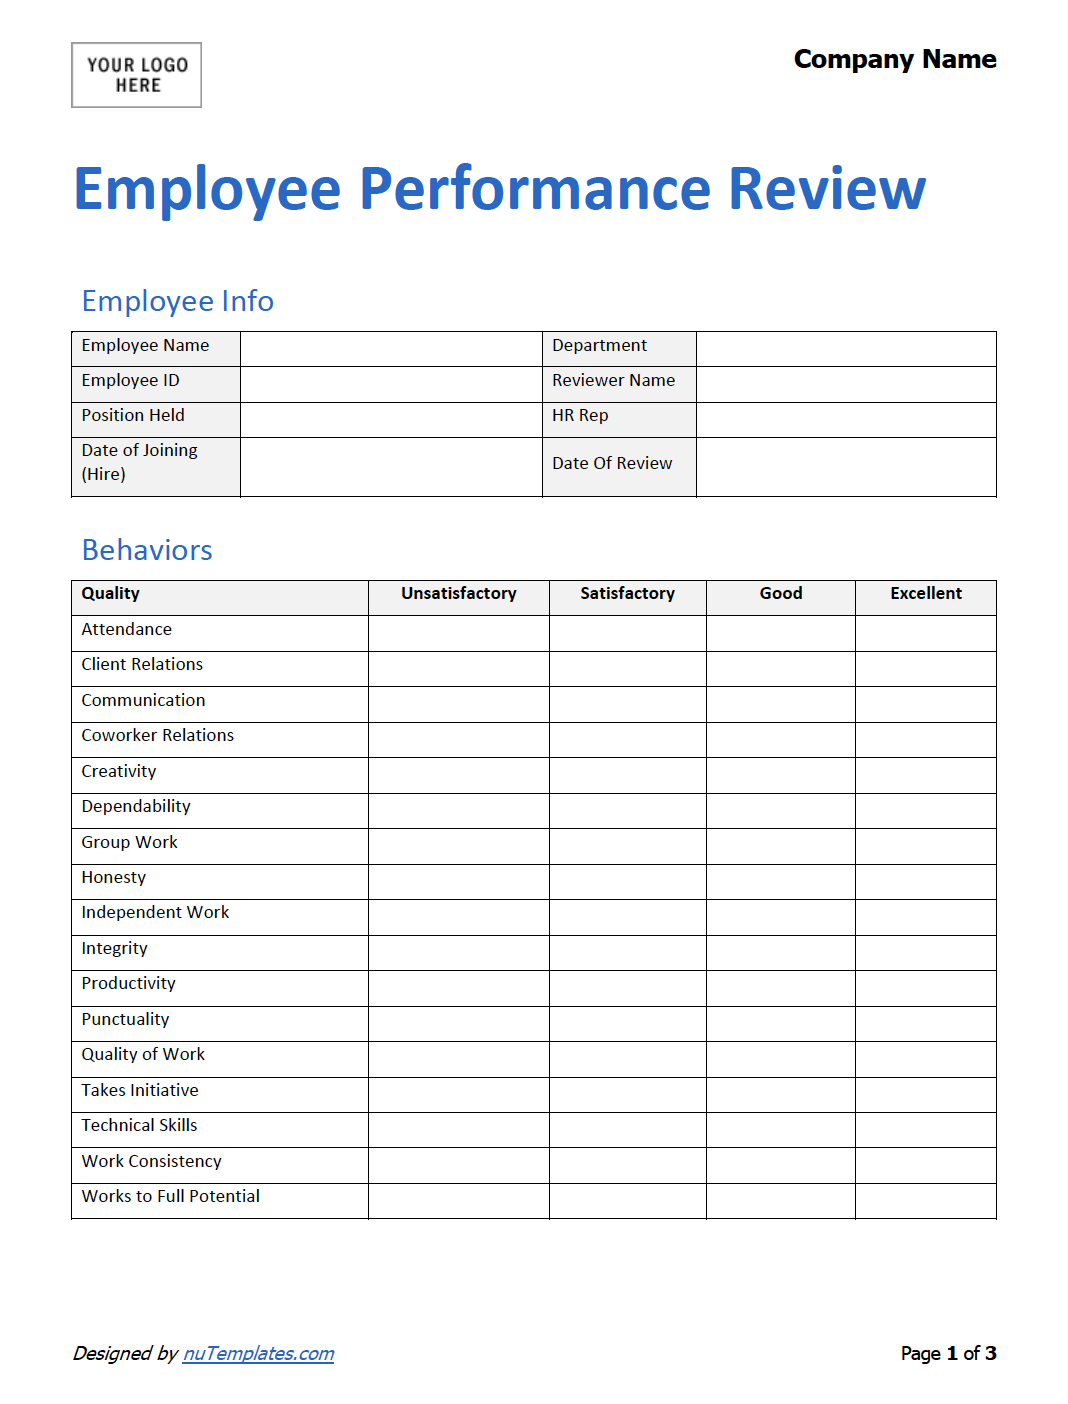 Employee Performance Review Template Nutemplates Free Nude Porn Photos